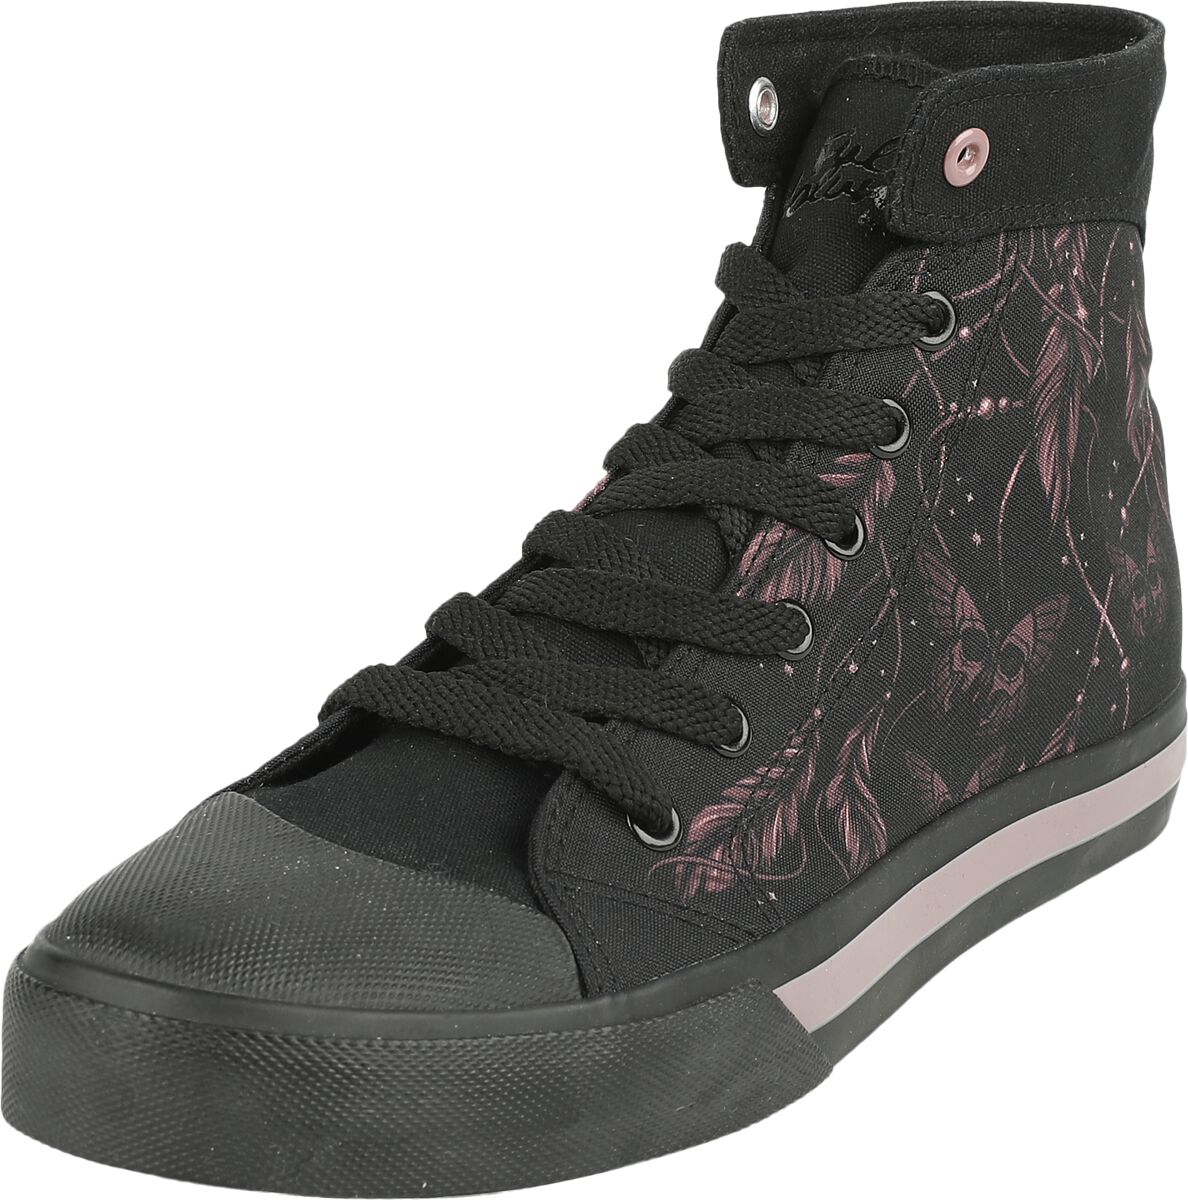 Full Volume by EMP Sneaker with Feathers and Butterflies Sneaker high schwarz in EU41